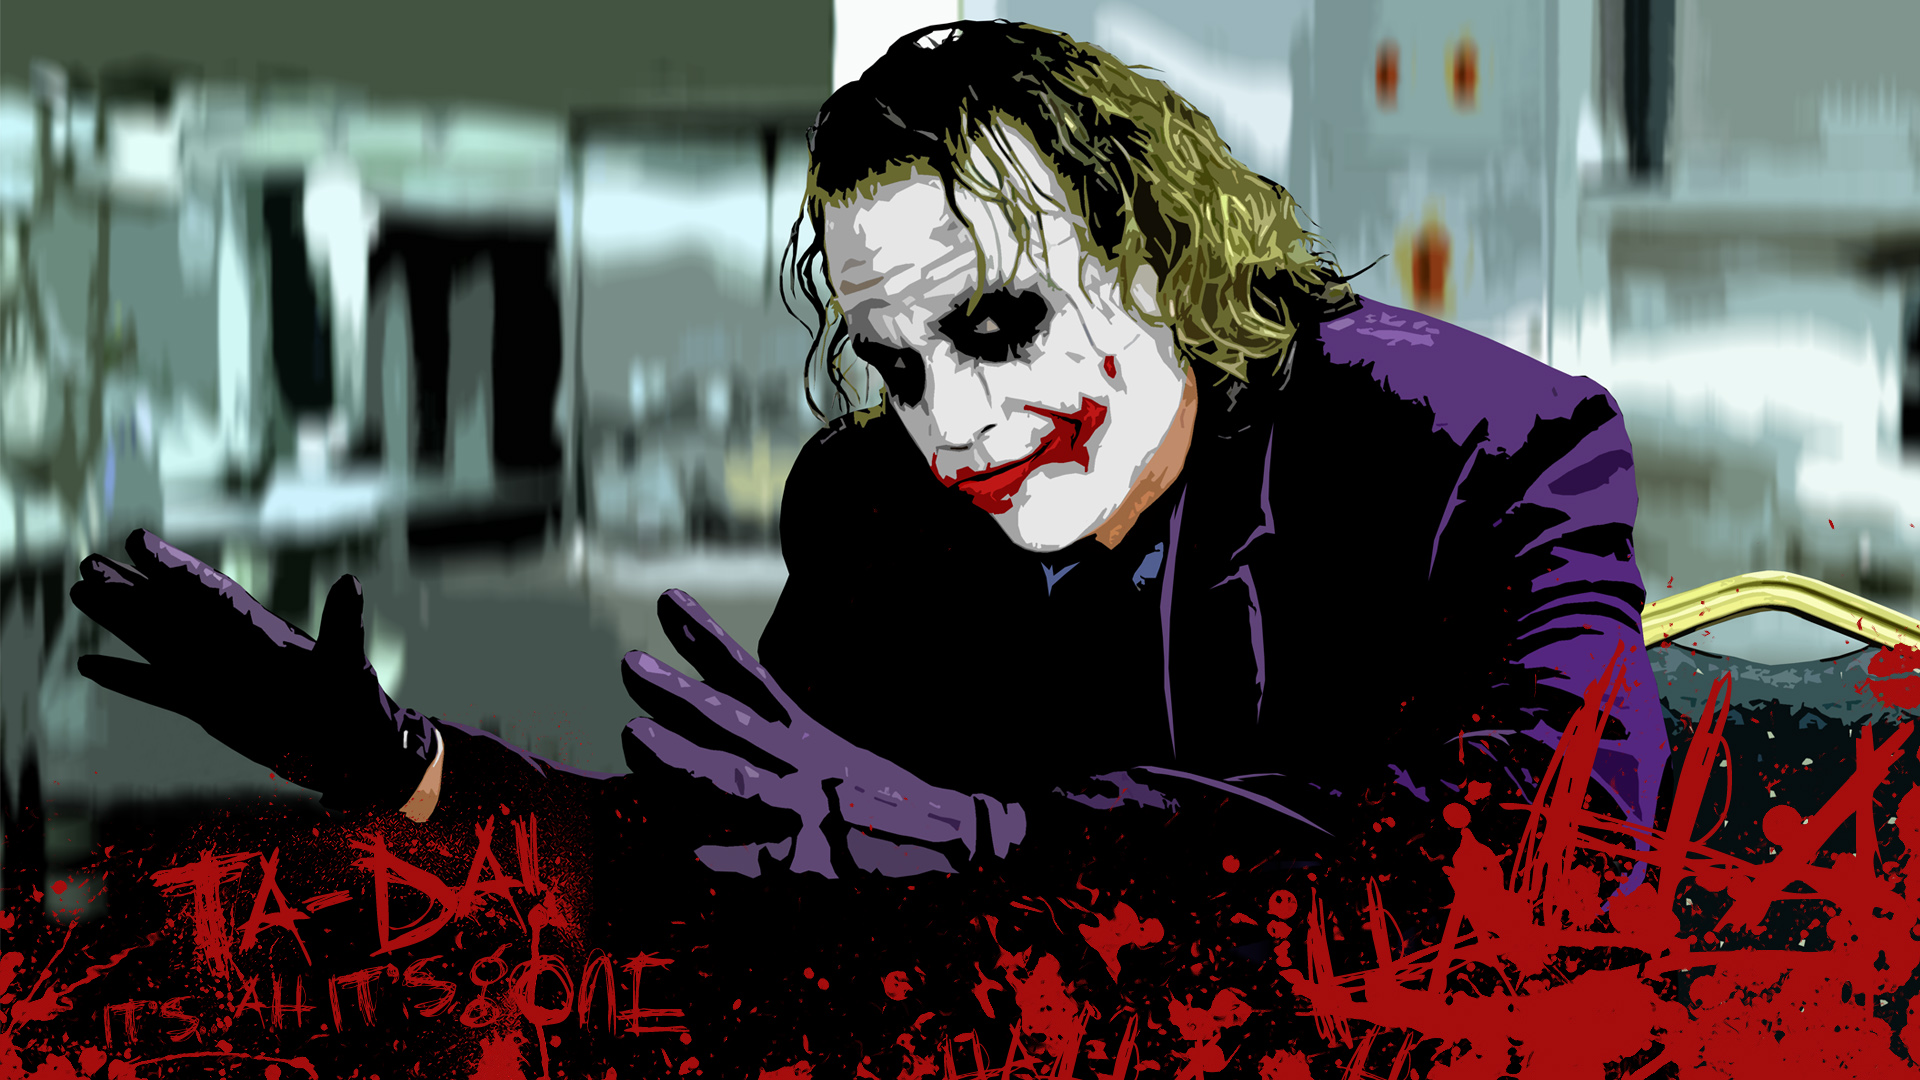 Joker Wallpaper Hd Download For Android Mobile Free